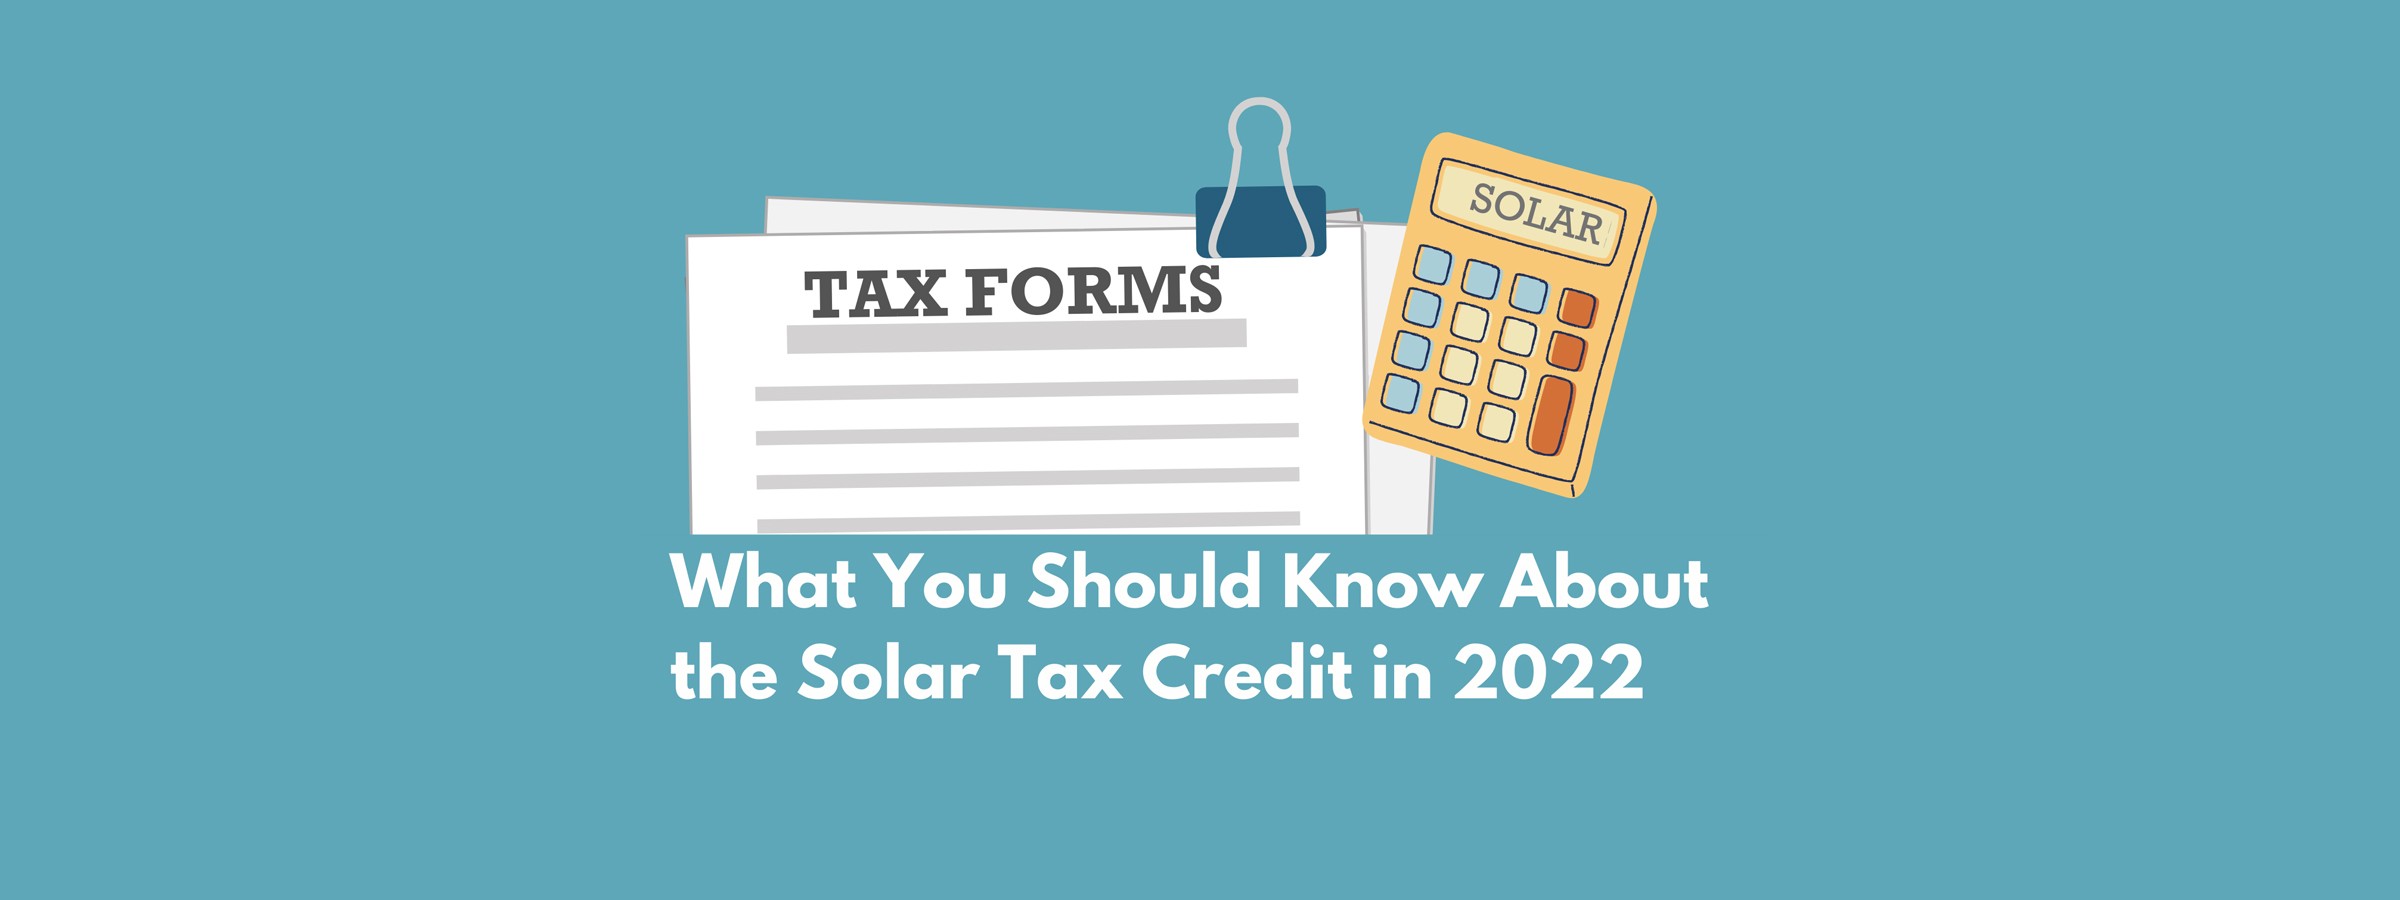 What You Should Know About the Solar Tax Credit in 2022